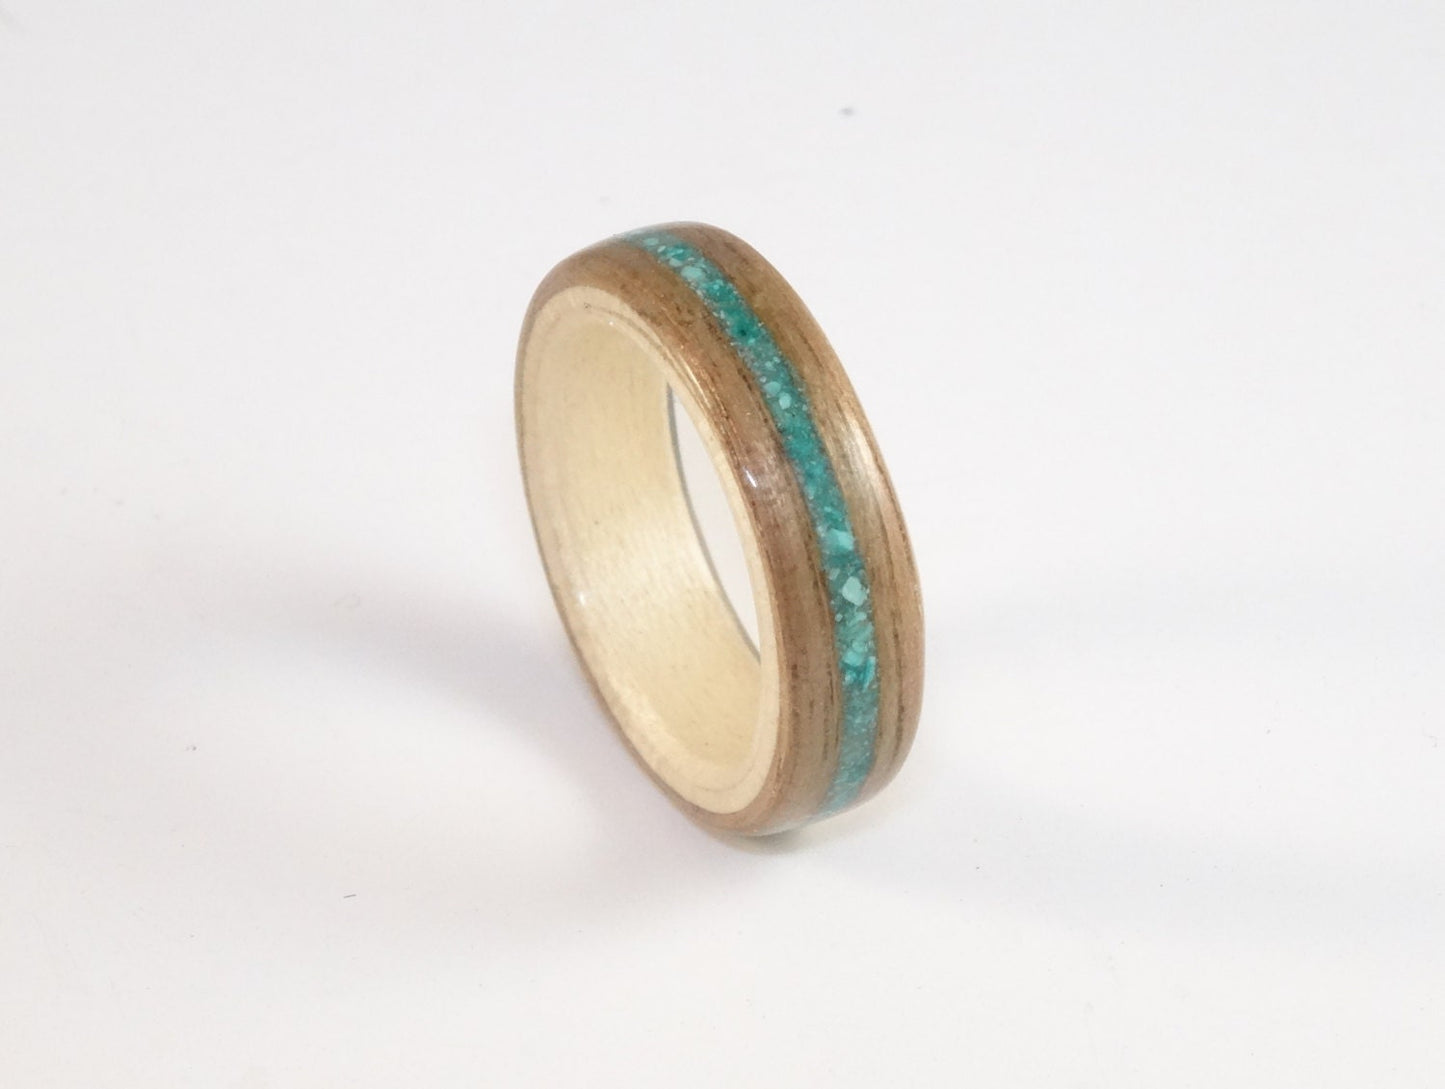 Walnut & Sycamore with Turquoise Bent Wood Ring